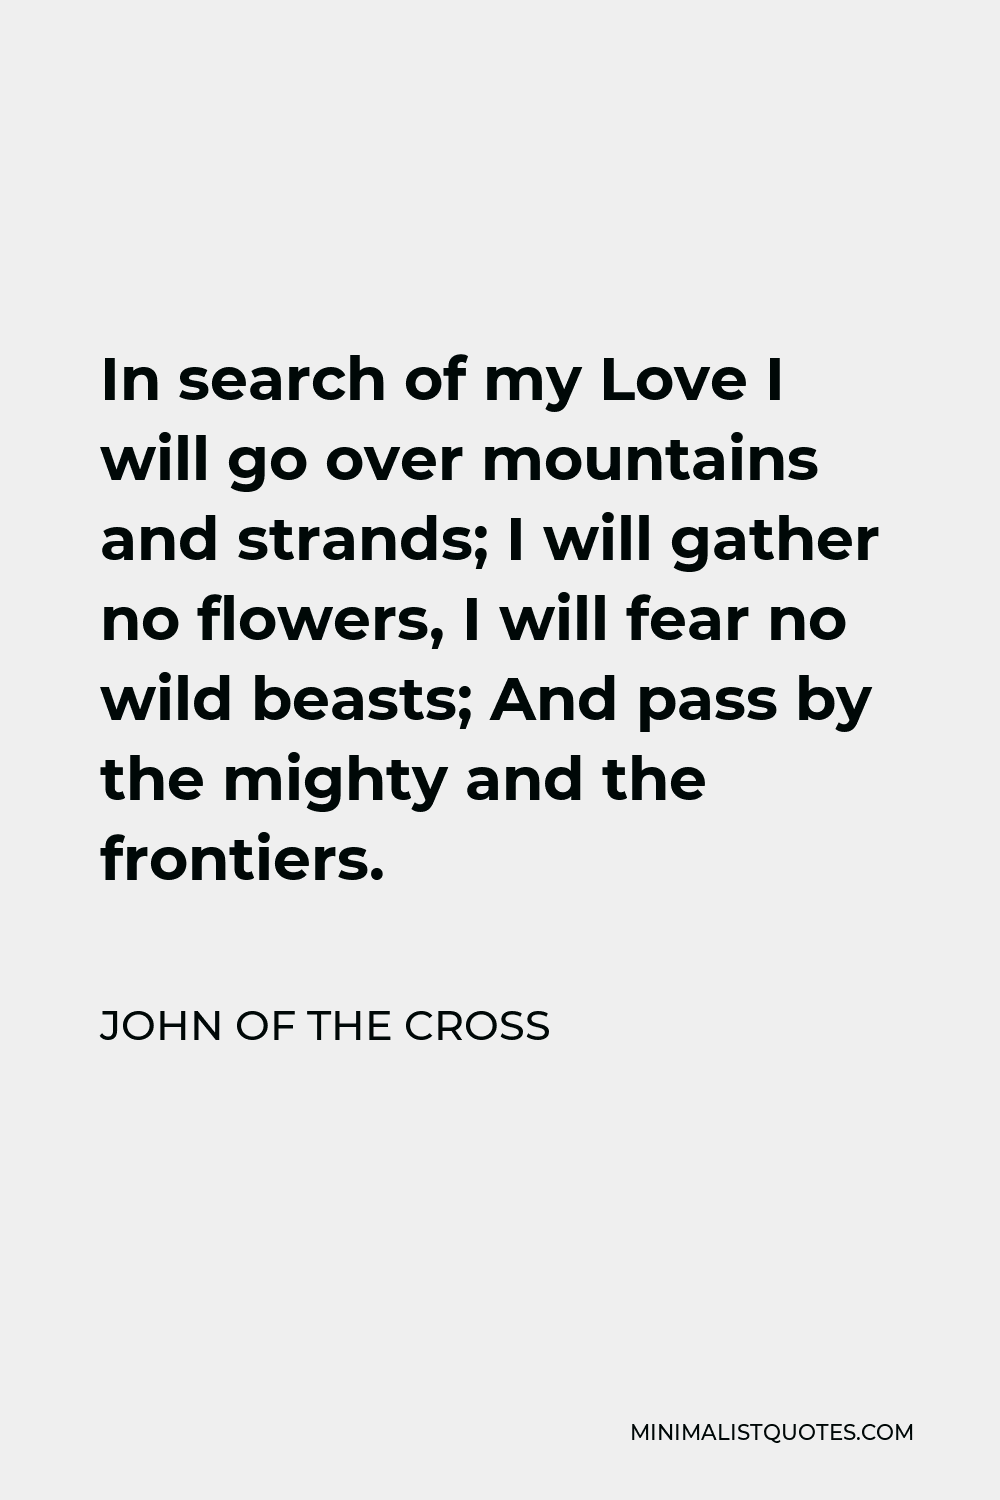 John of the Cross Quote - In search of my Love I will go over mountains and strands; I will gather no flowers, I will fear no wild beasts; And pass by the mighty and the frontiers.